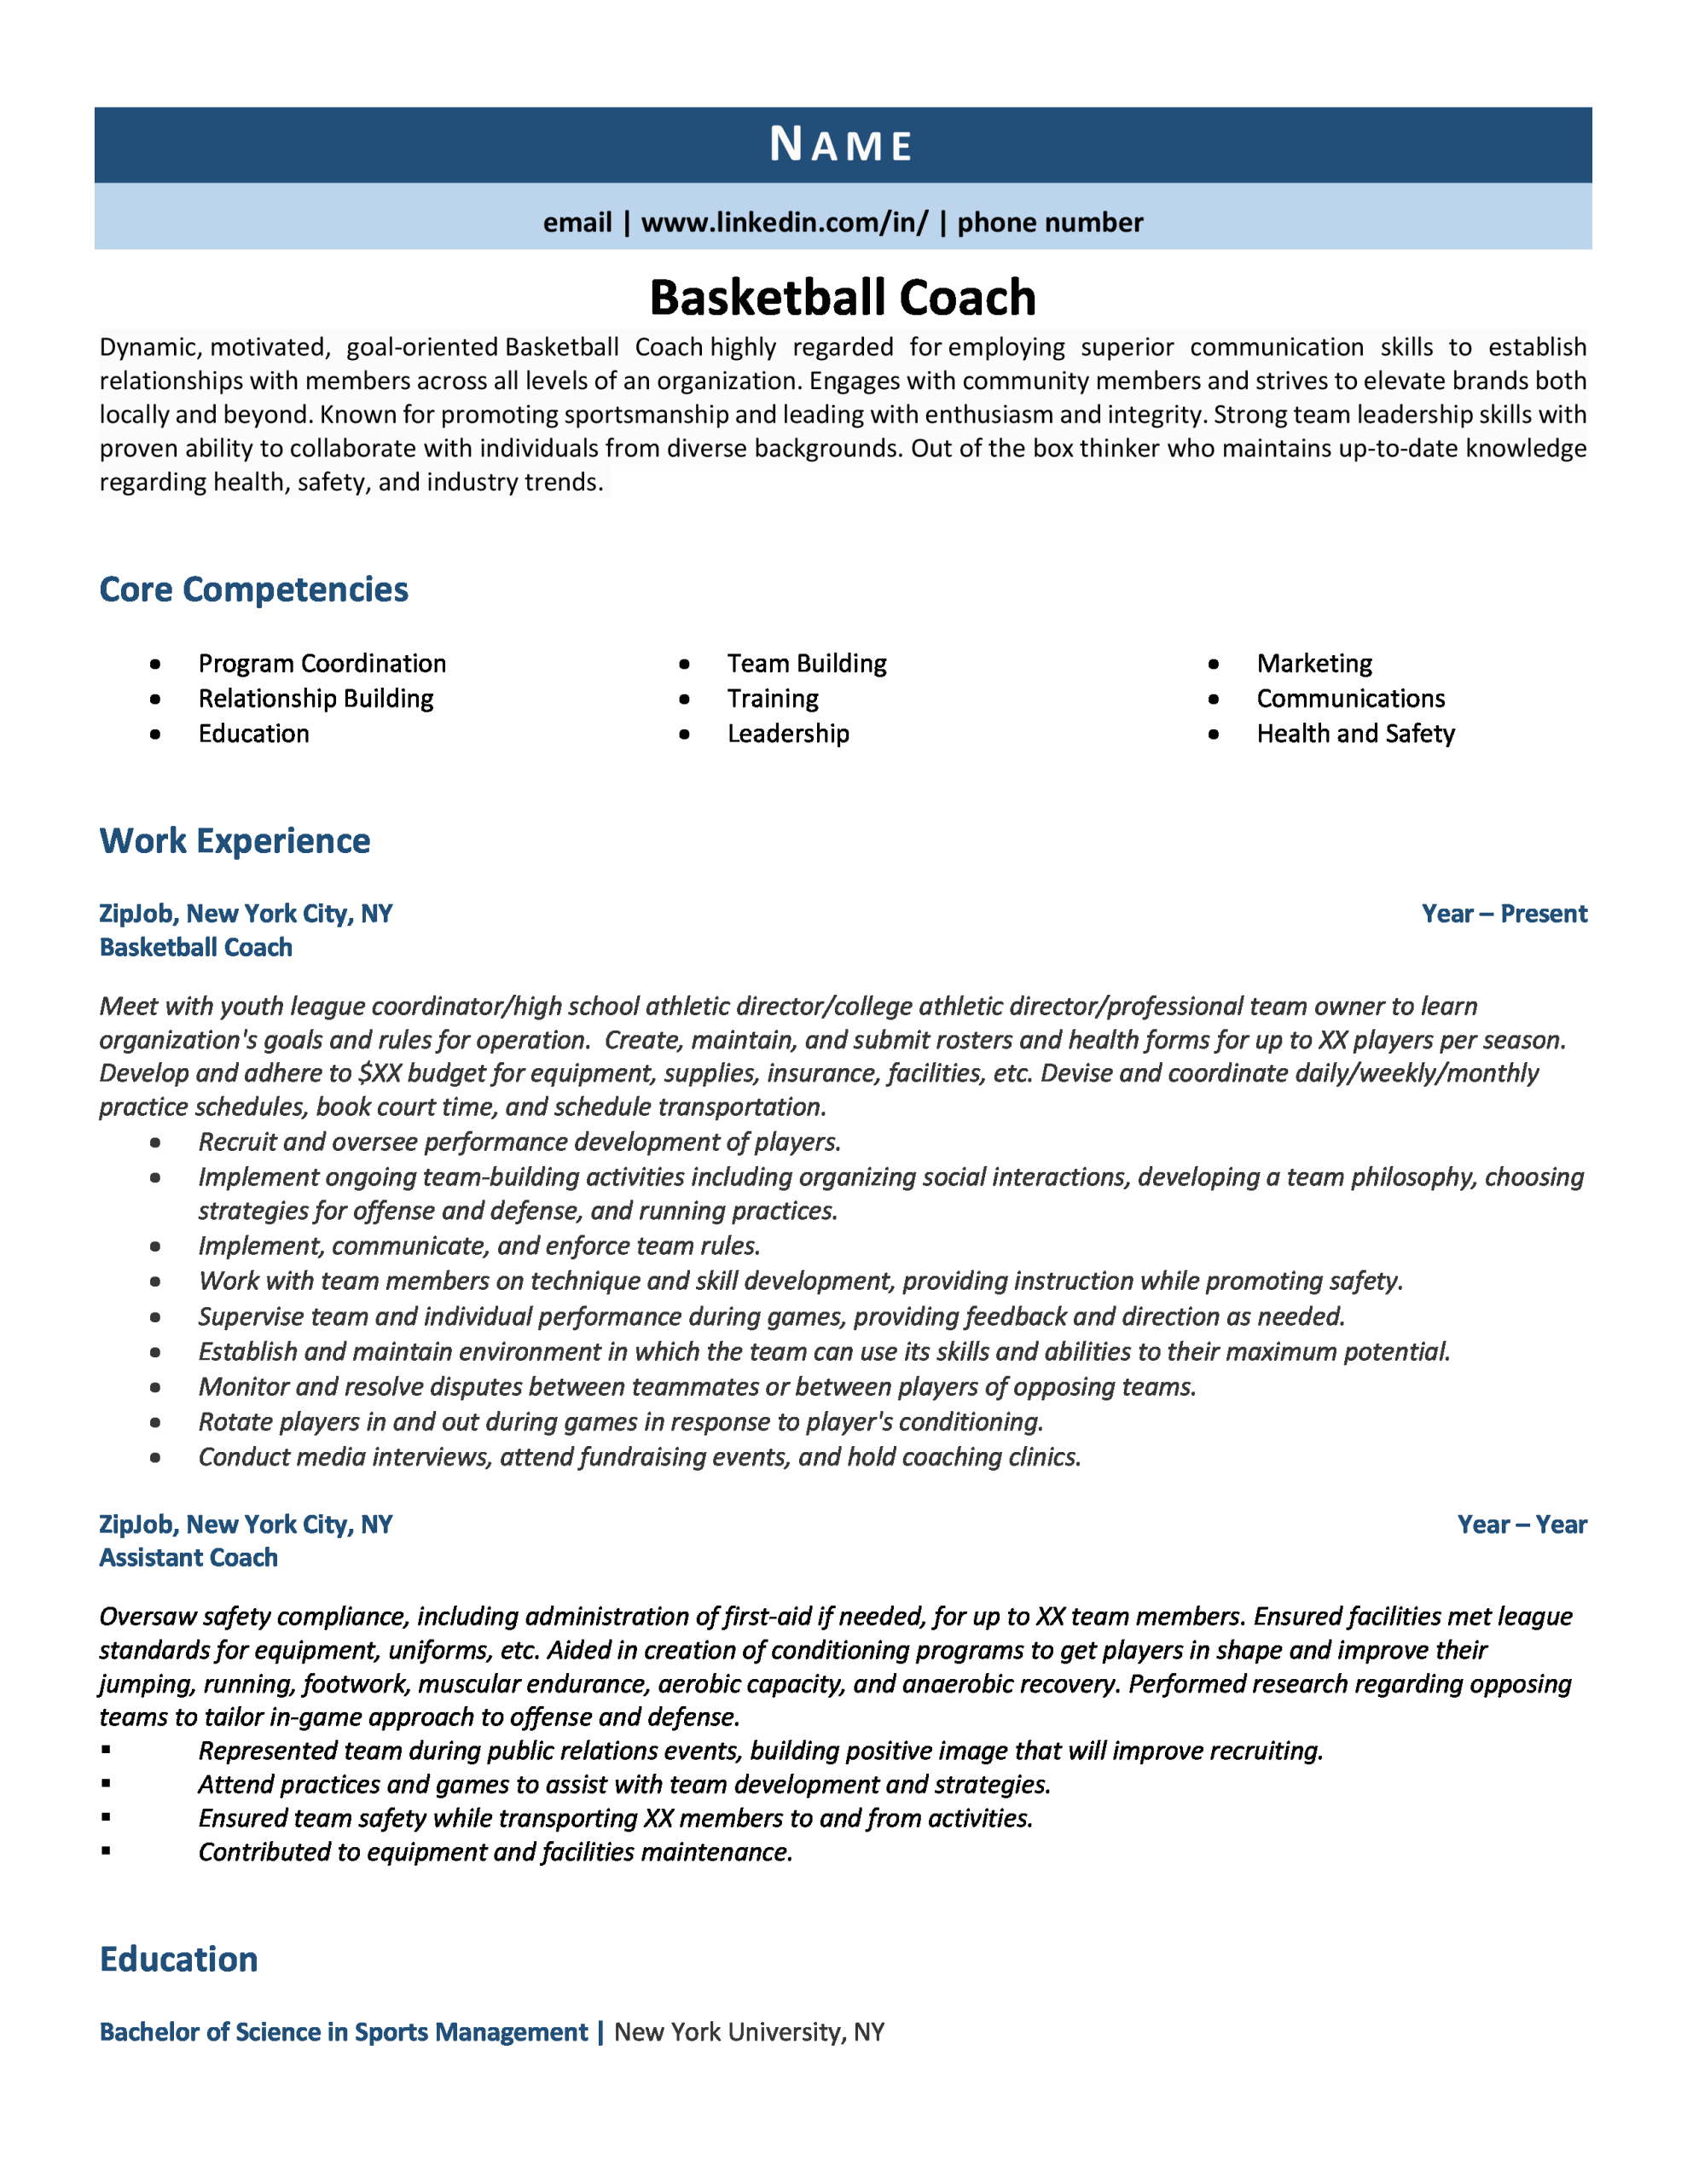 Samples Of A College Coaching Resume Basketball Coach Resume Example & Guideyour Plete Guide On How to